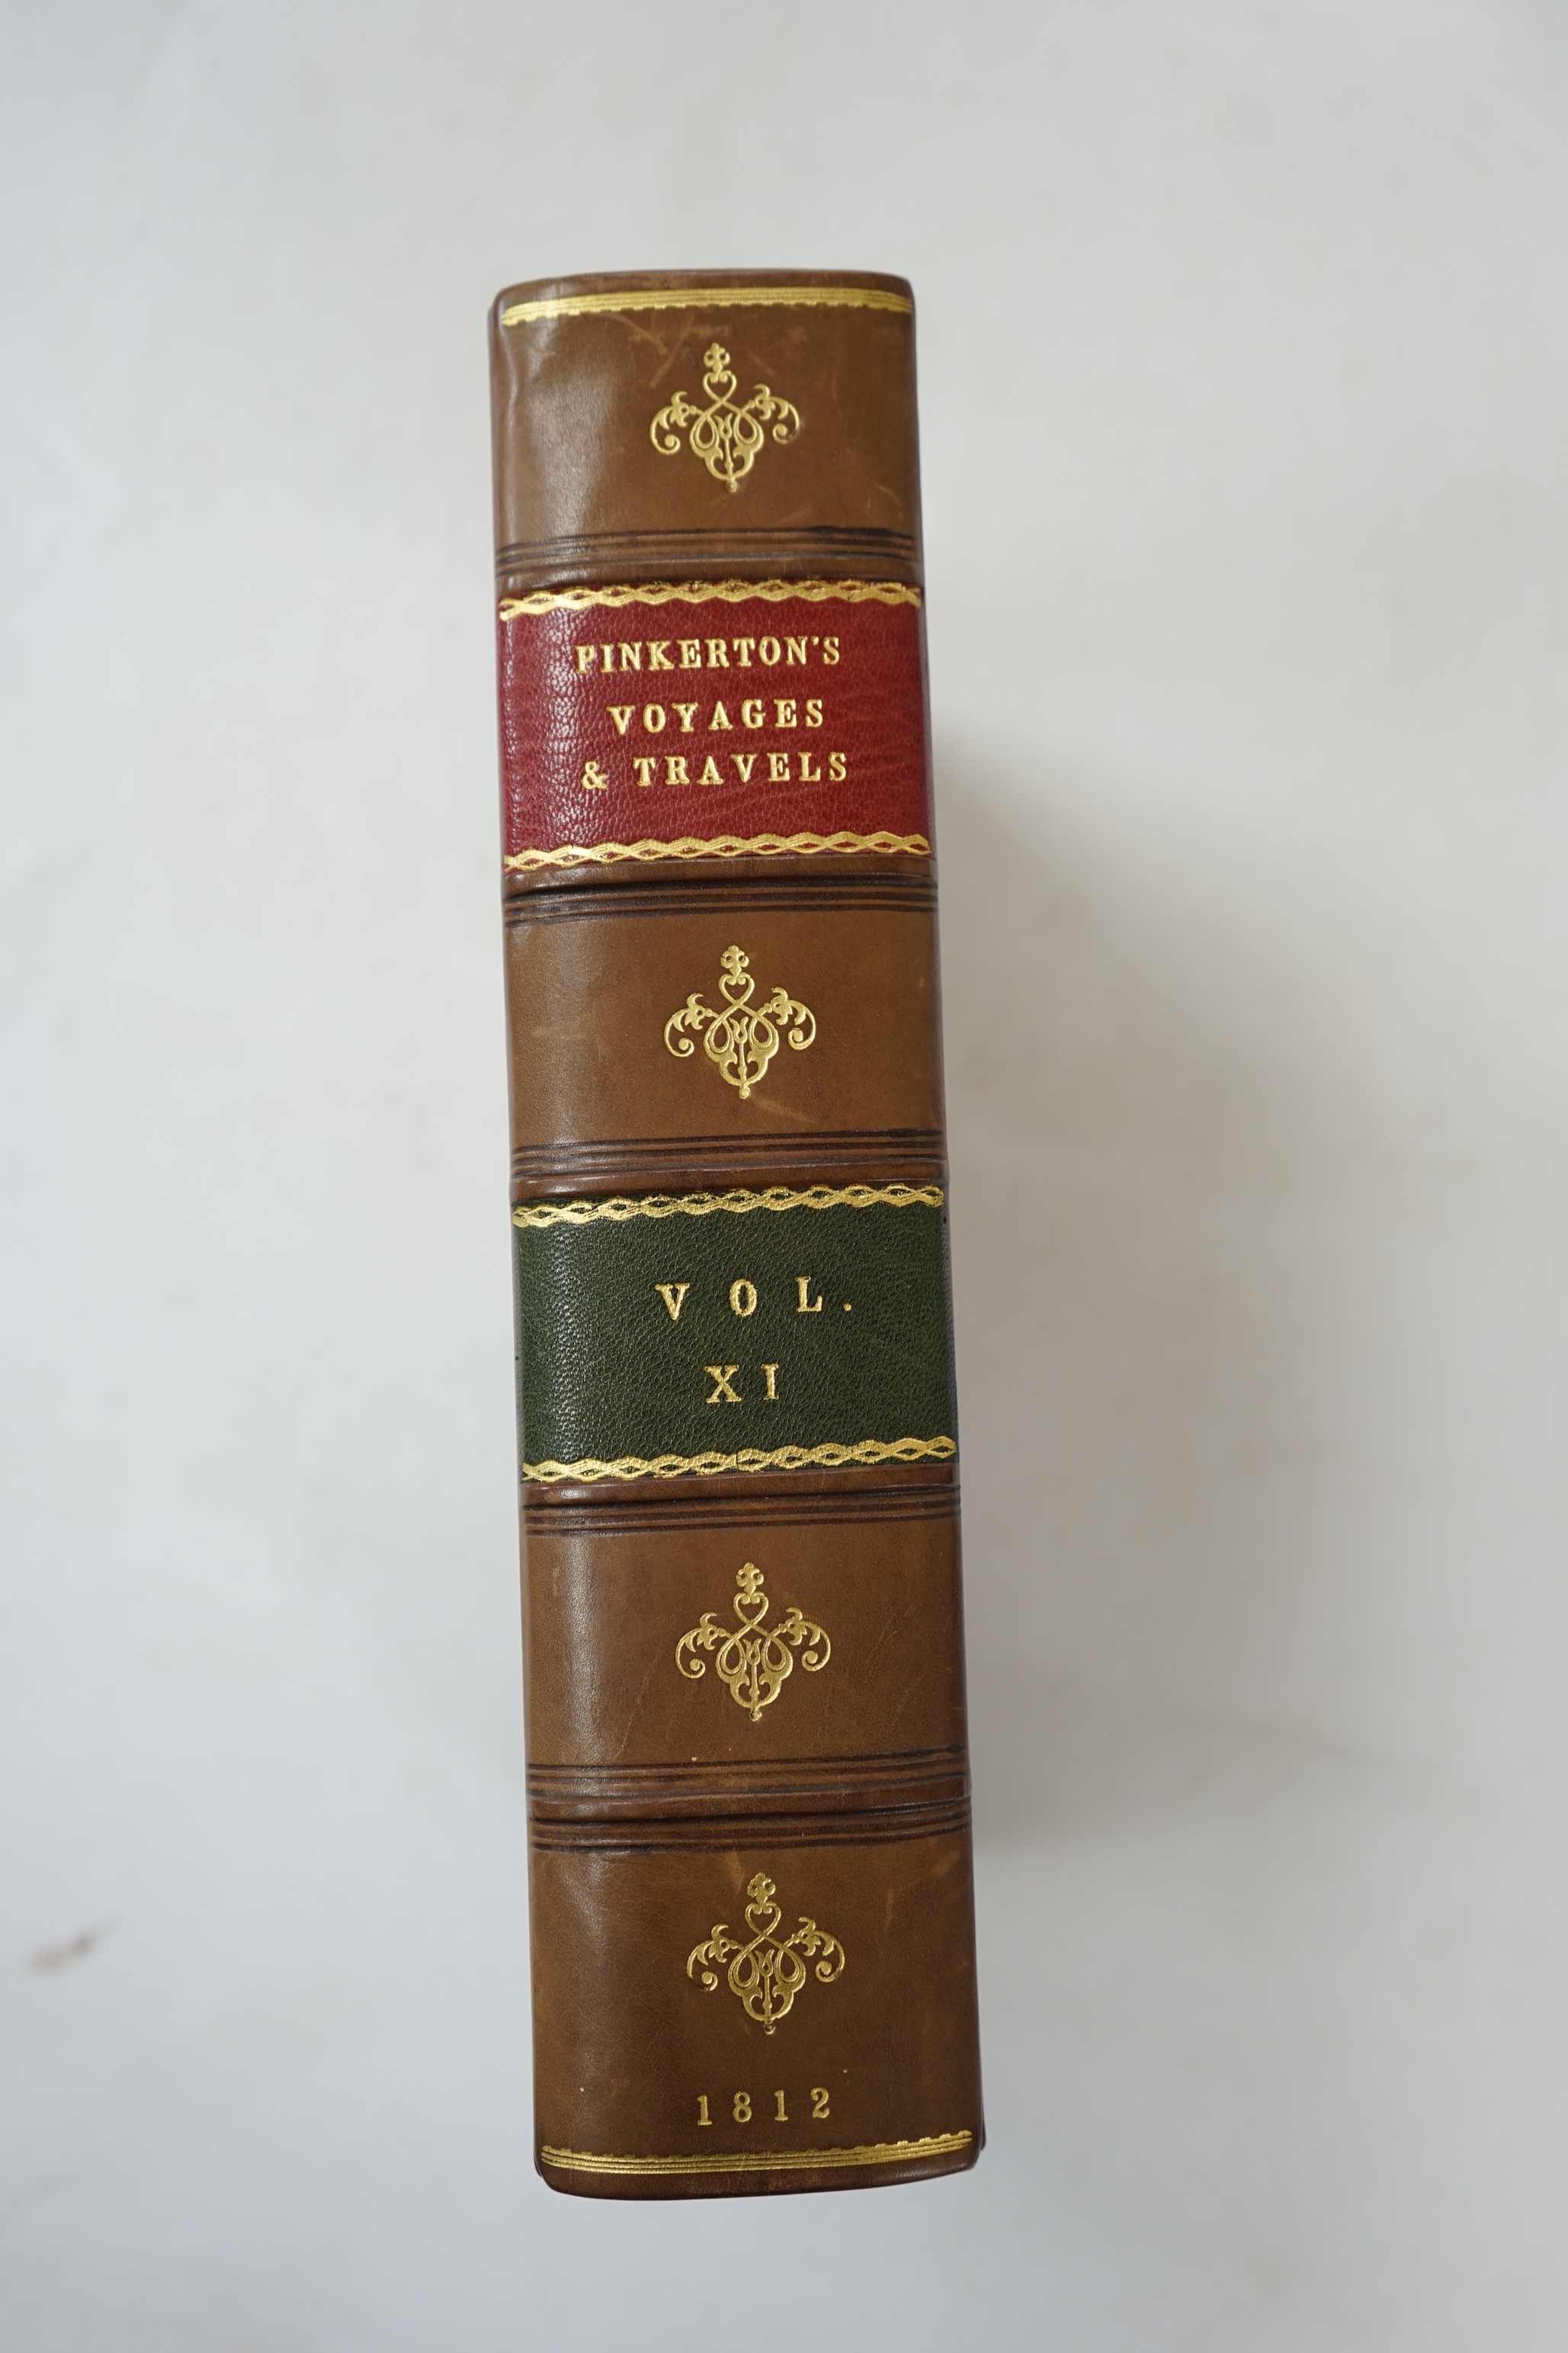 Pinkerton, John - A General Collection of the Best and Most Interesting Voyages and Travels in All Parts of the World. Volume the eleventh, (Only Asiatic Islands)